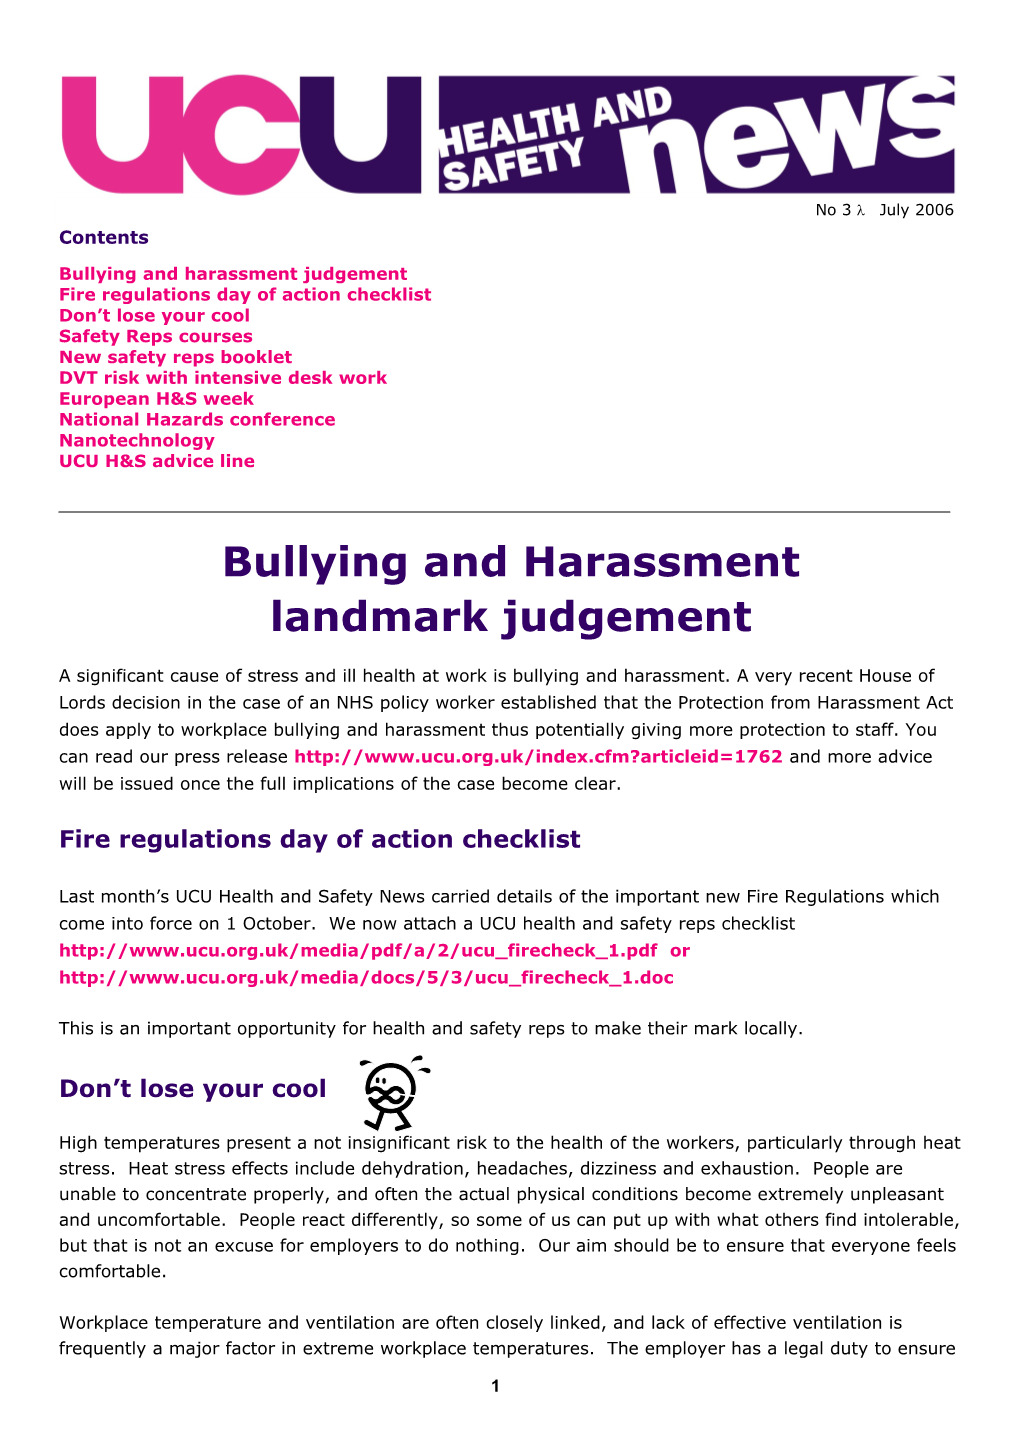 Bullying and Harassment Judgement